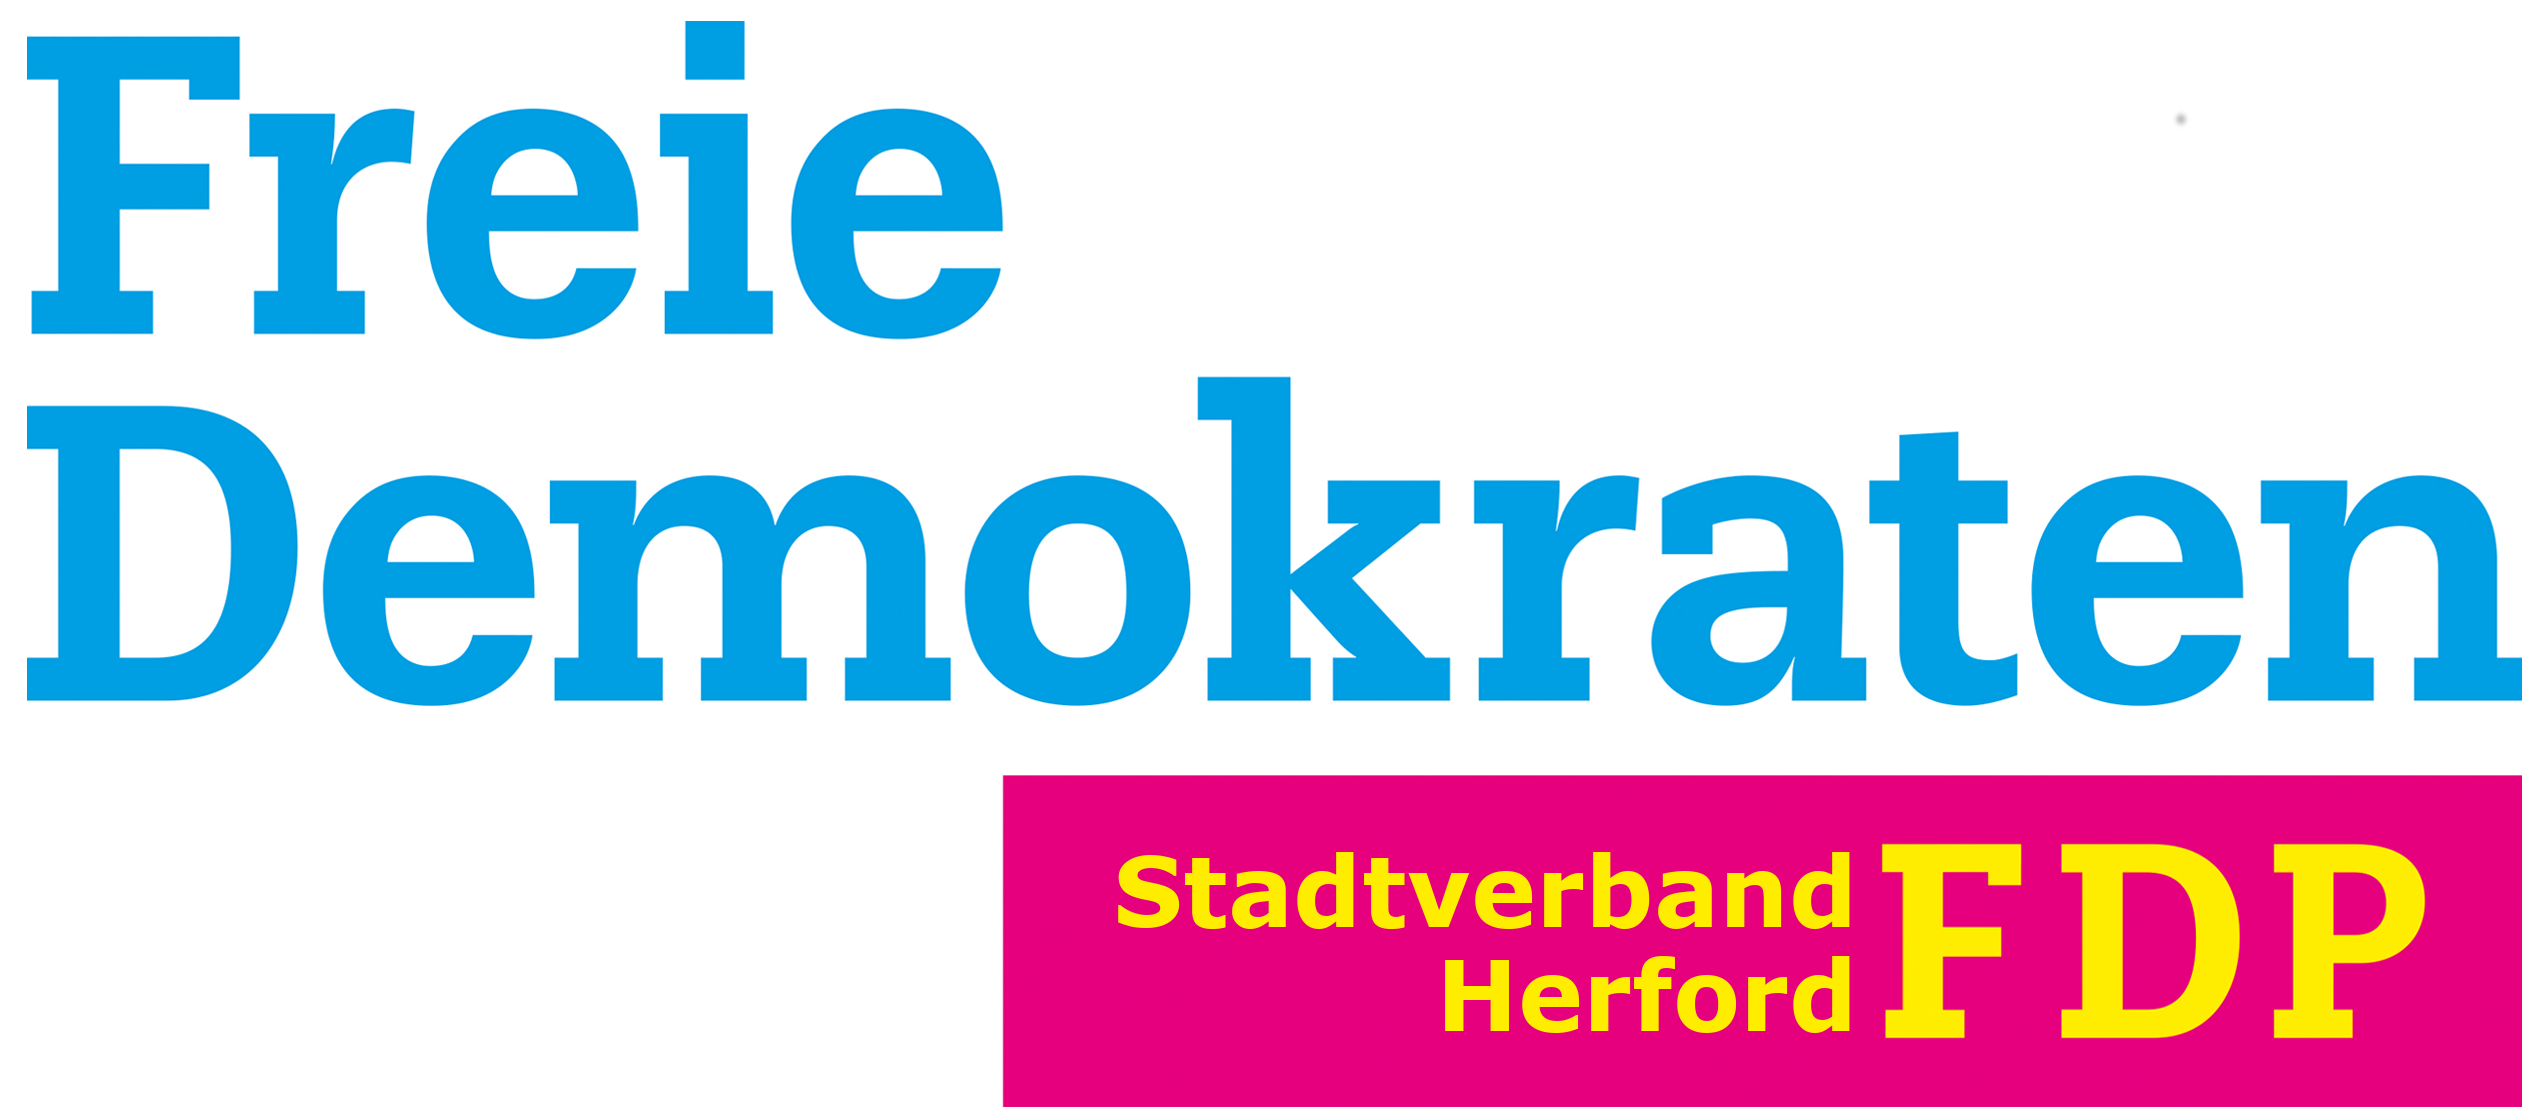 FDP Stadtverband Herford